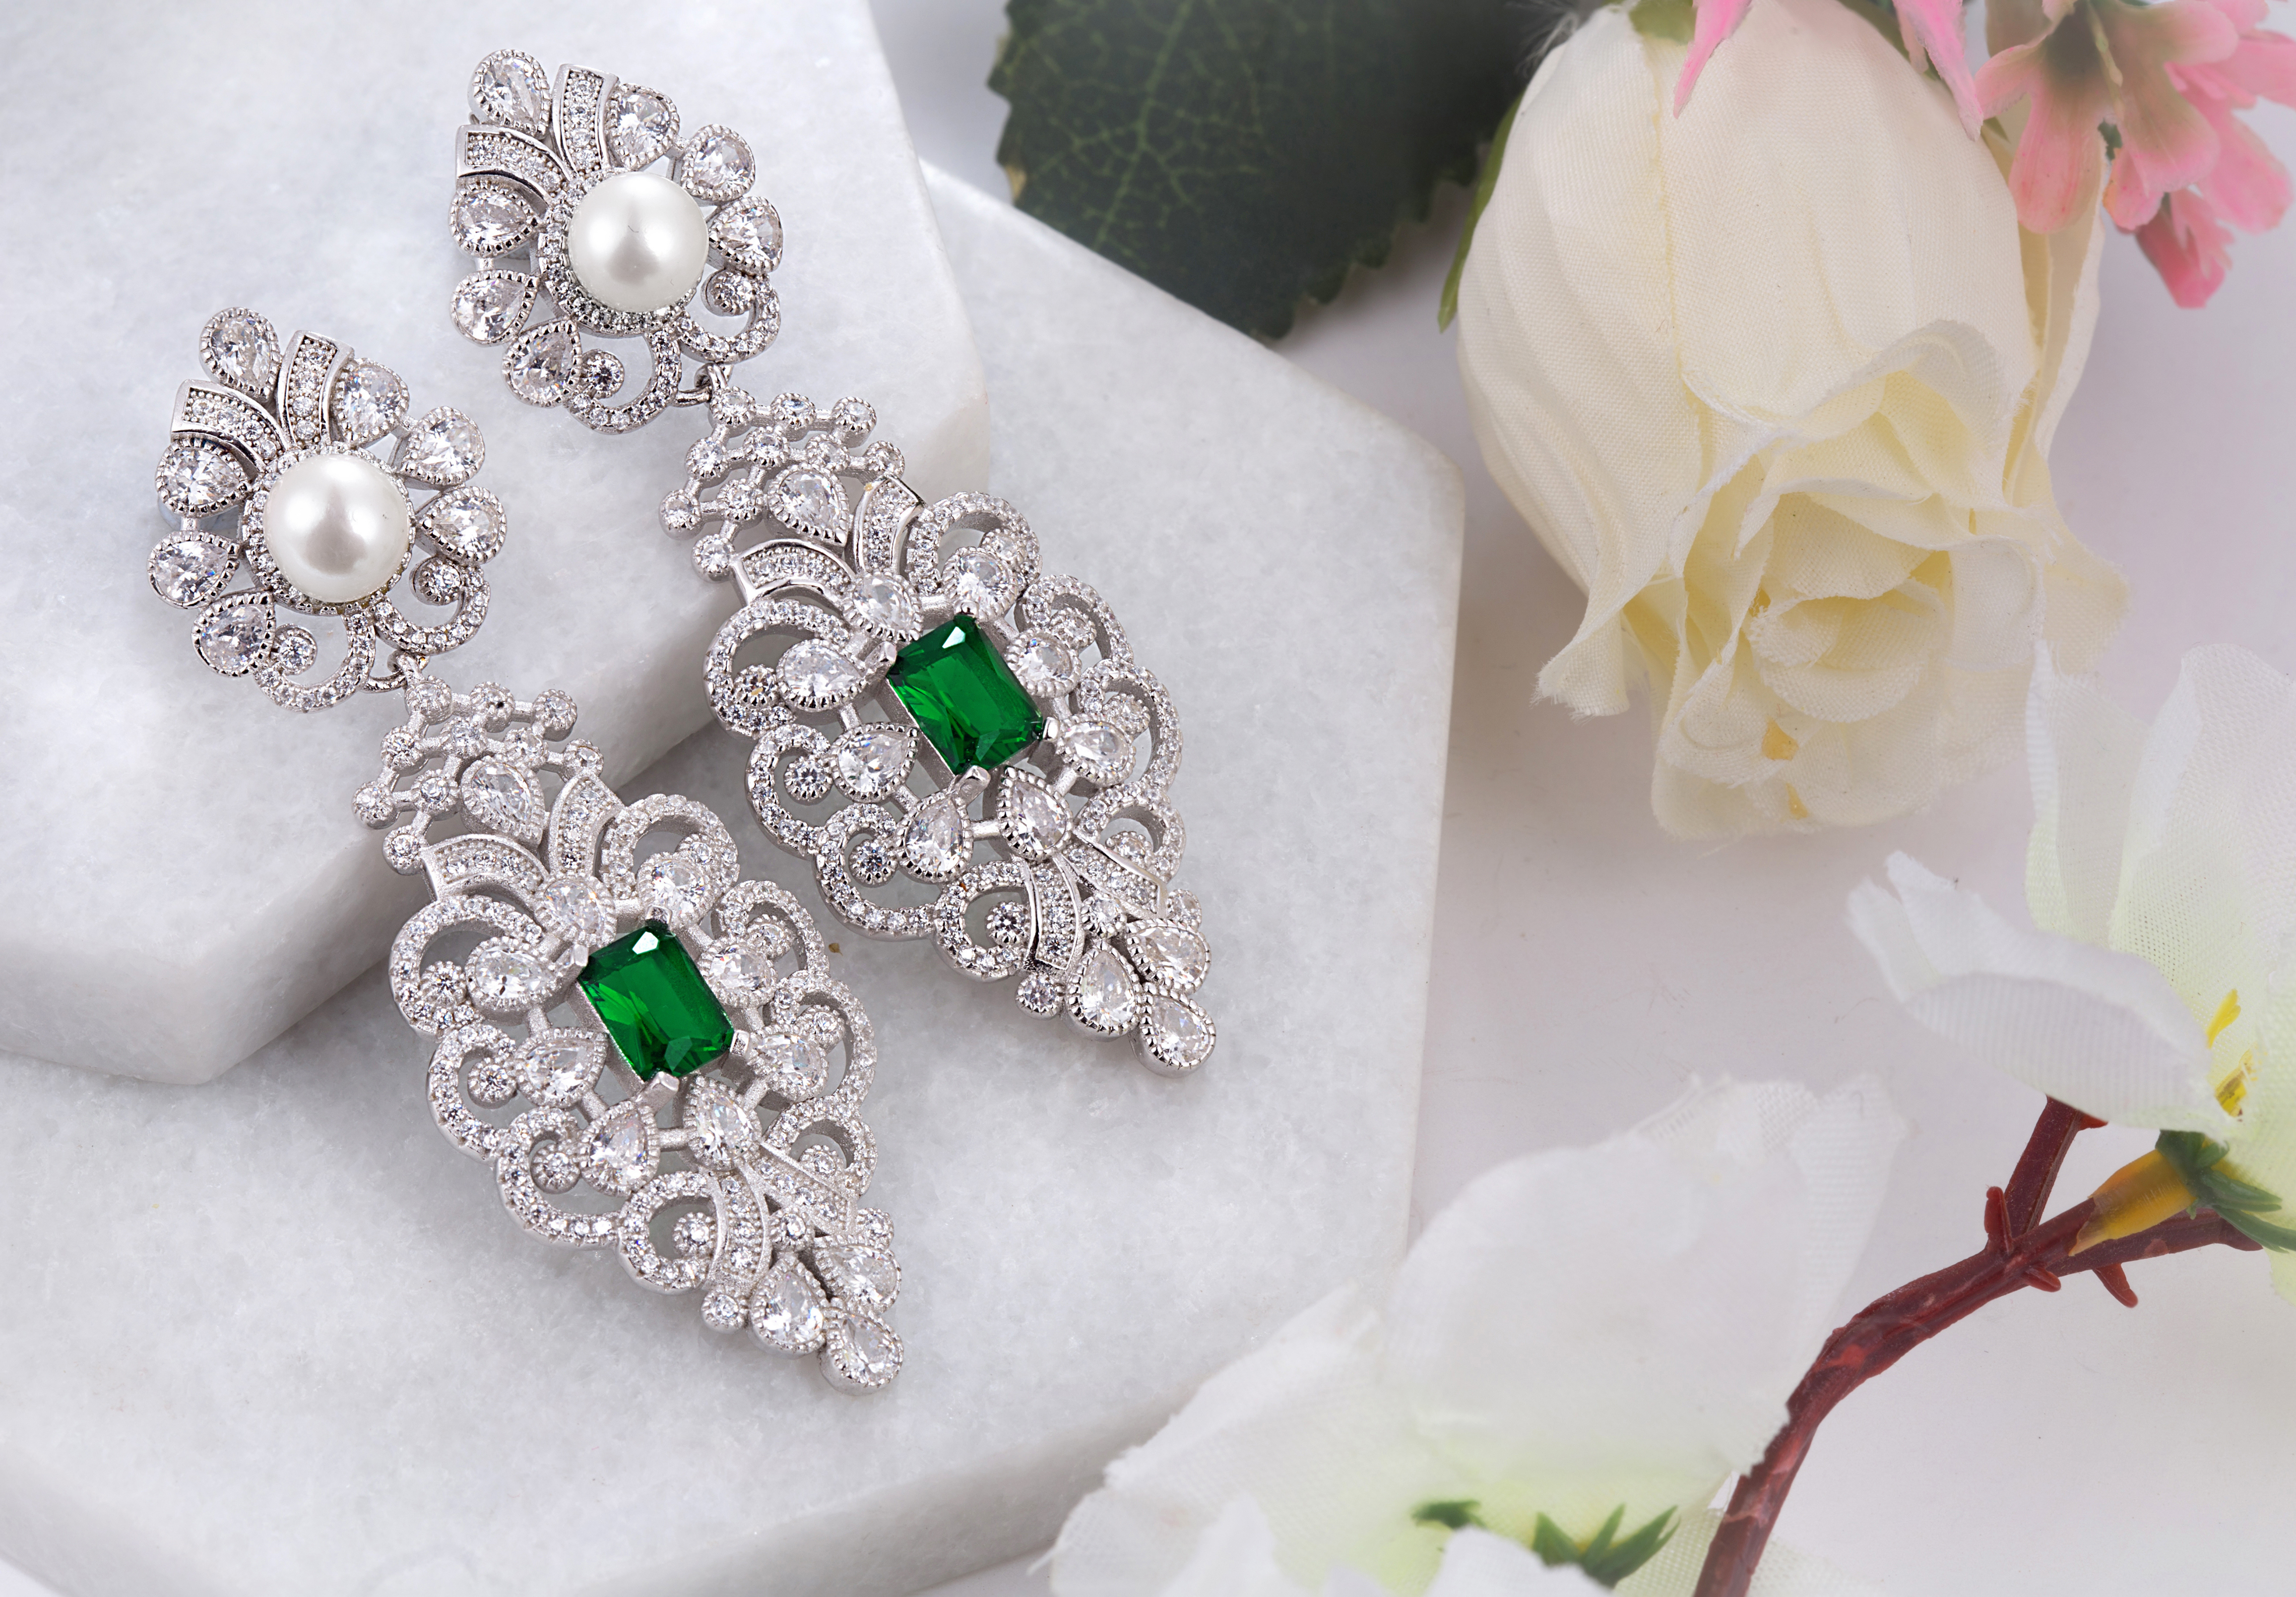 92.5 sterling silver chandelier earring embedded with green stone, sparkling zirconias and pearls from cocktail range